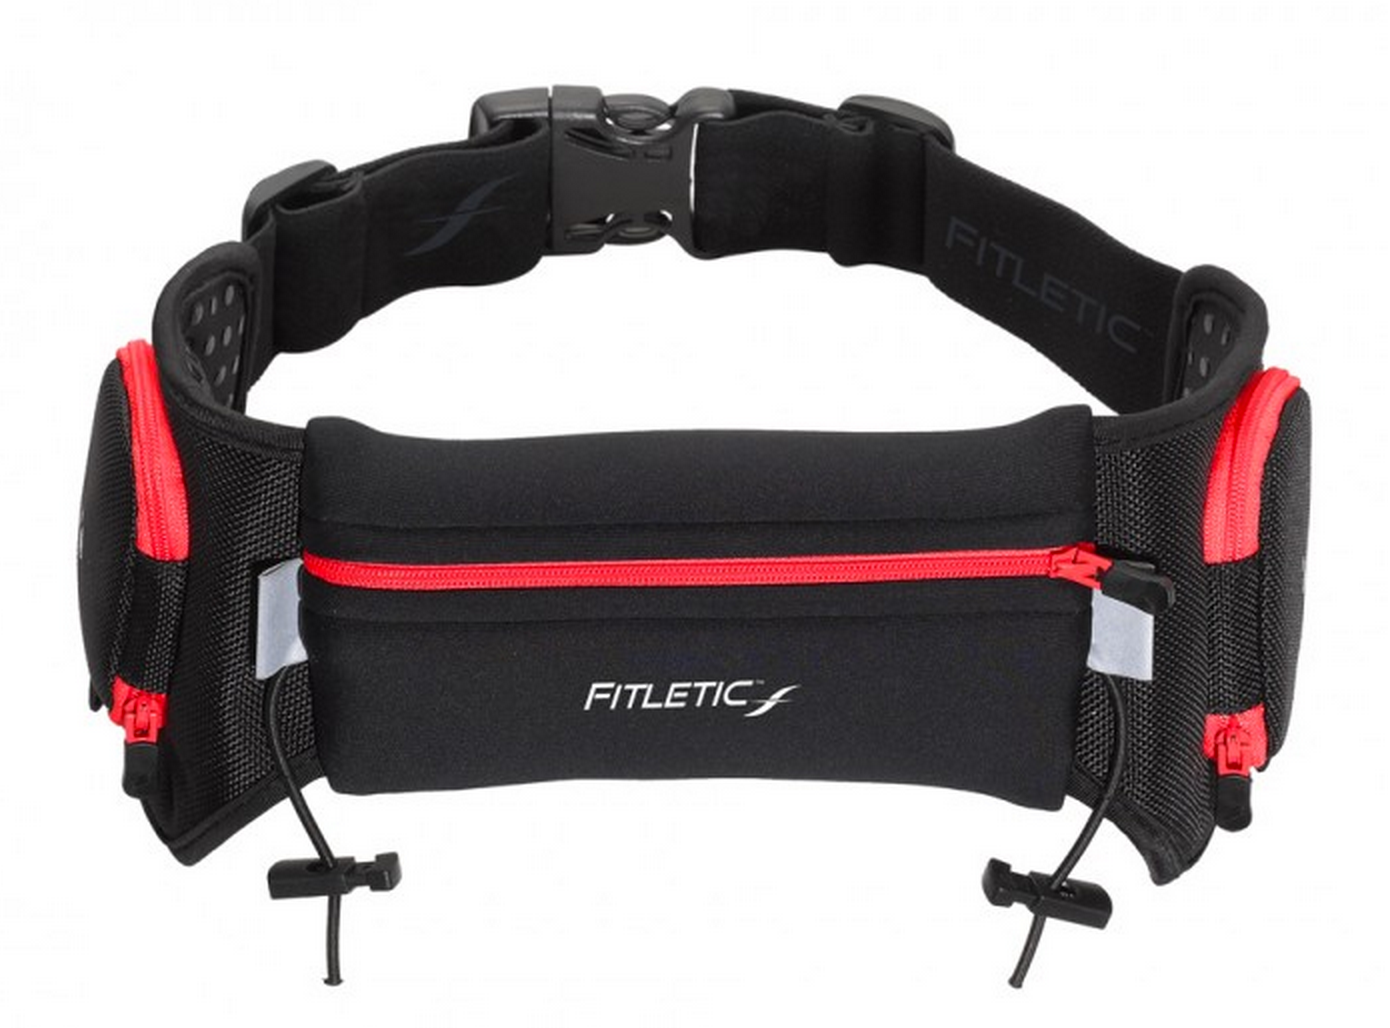 Fitness tech gifts: Fitletic Quench Retractable Hydration Belt